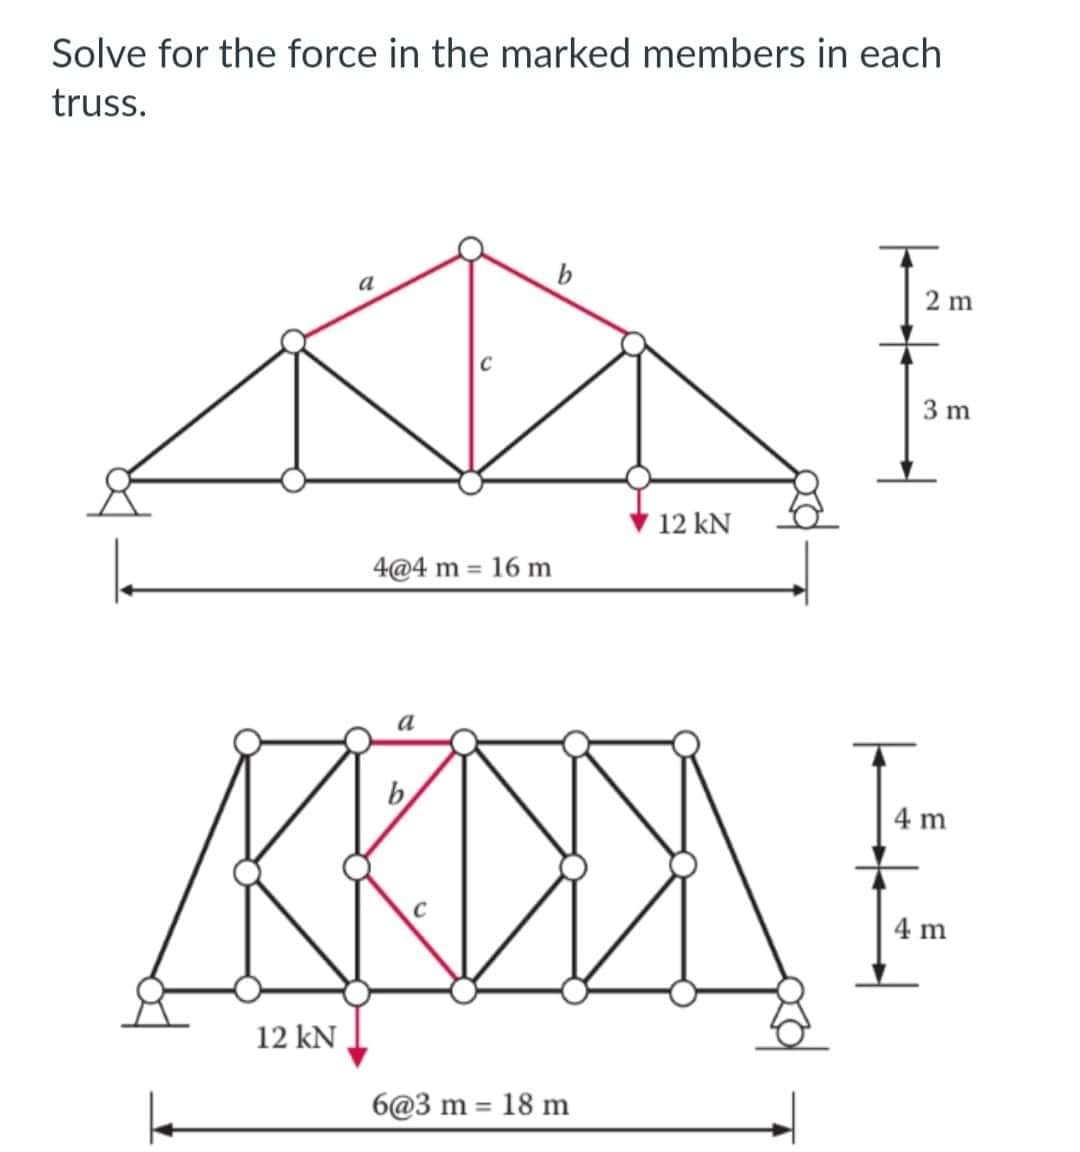 Solve for the force in the marked members in each
truss.
a
12 kN
4@4 m = 16 m
b
12 kN
6@3 m = 18 m
2 m
b
4 m
AKIYA E
4 m
3 m